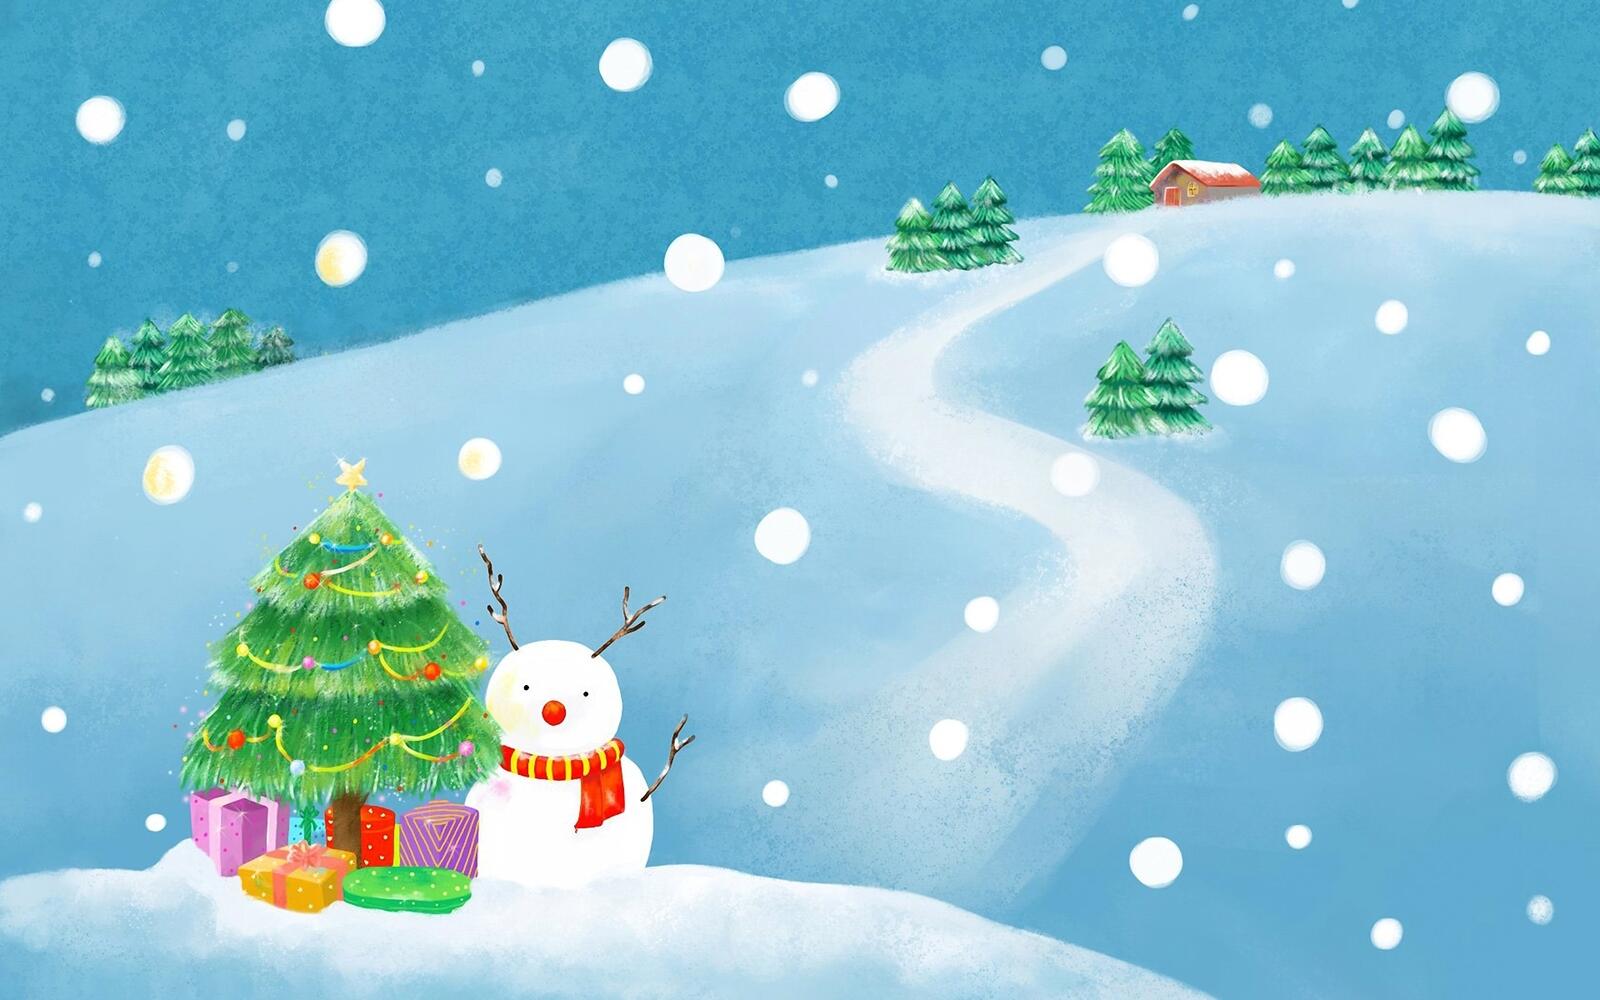 Wallpapers snow new year snowman on the desktop